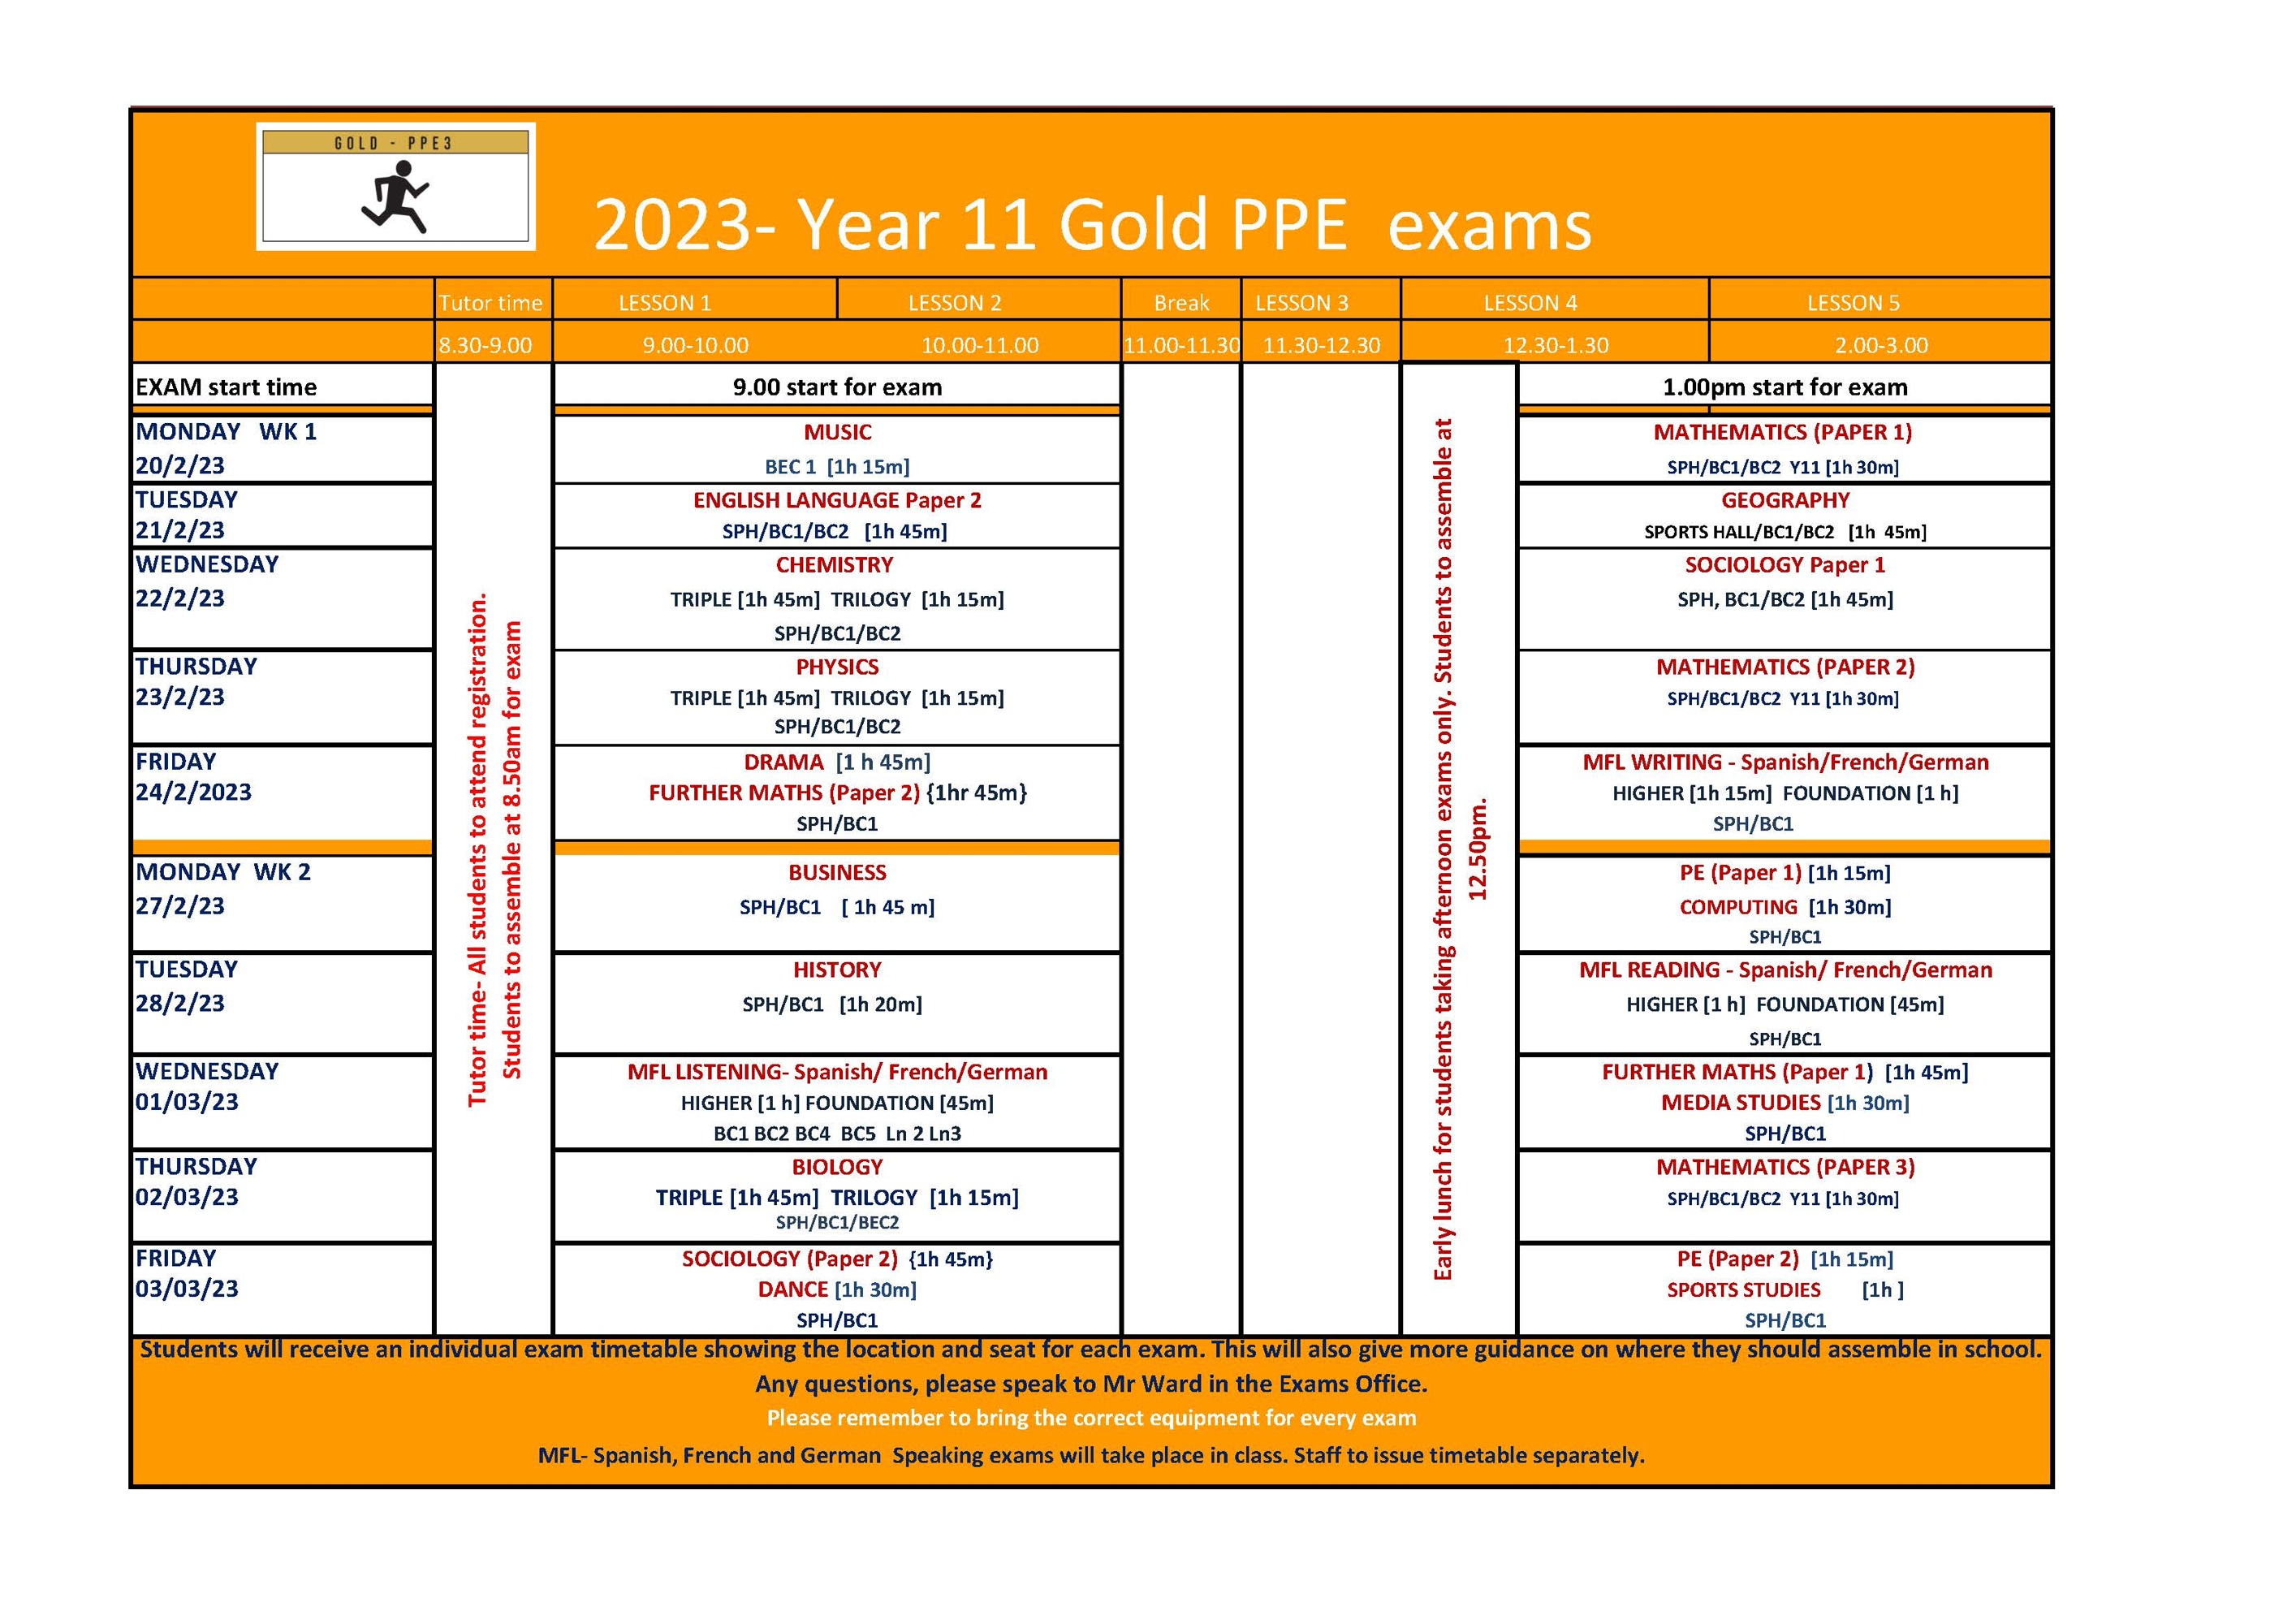 Gold PPE Timetable for Y11 Feb 2022 080223